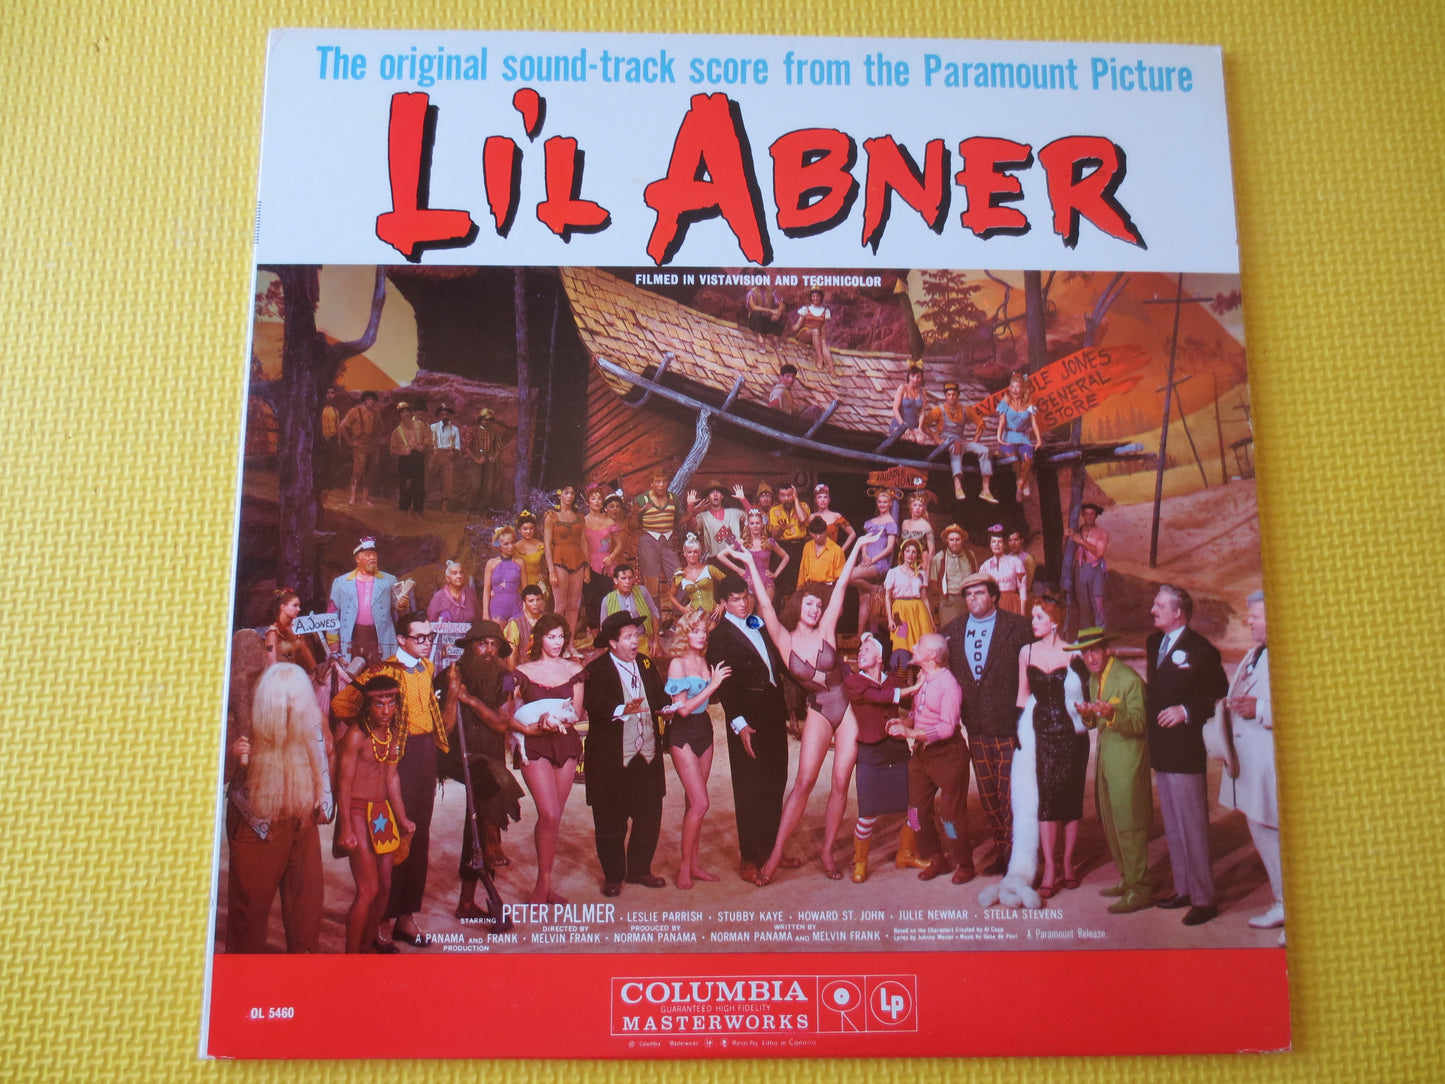 Lil ABNER, SOUNDTRACK Album, Lil ABNER Record, Soundtrack Albums, Screen Albums, Vinyl Lp, lps, Soundtrack Lps, 1959 Record